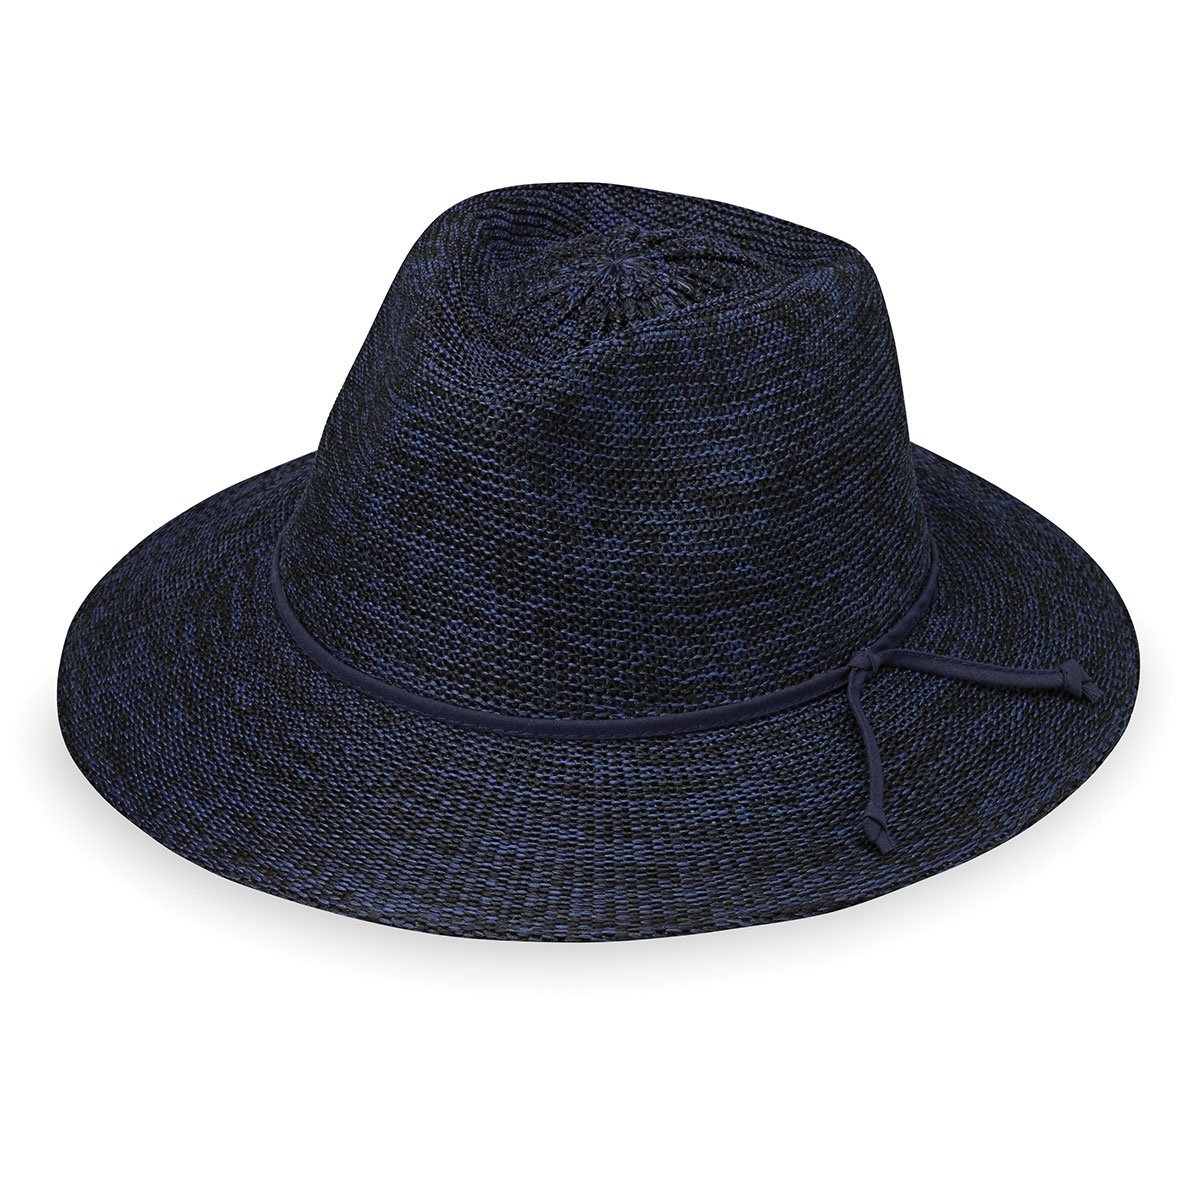 Featuring Women's Packable Victoria Fedora Style straw UPF Summer Hat for travel in Mixed Navy from Wallaroo